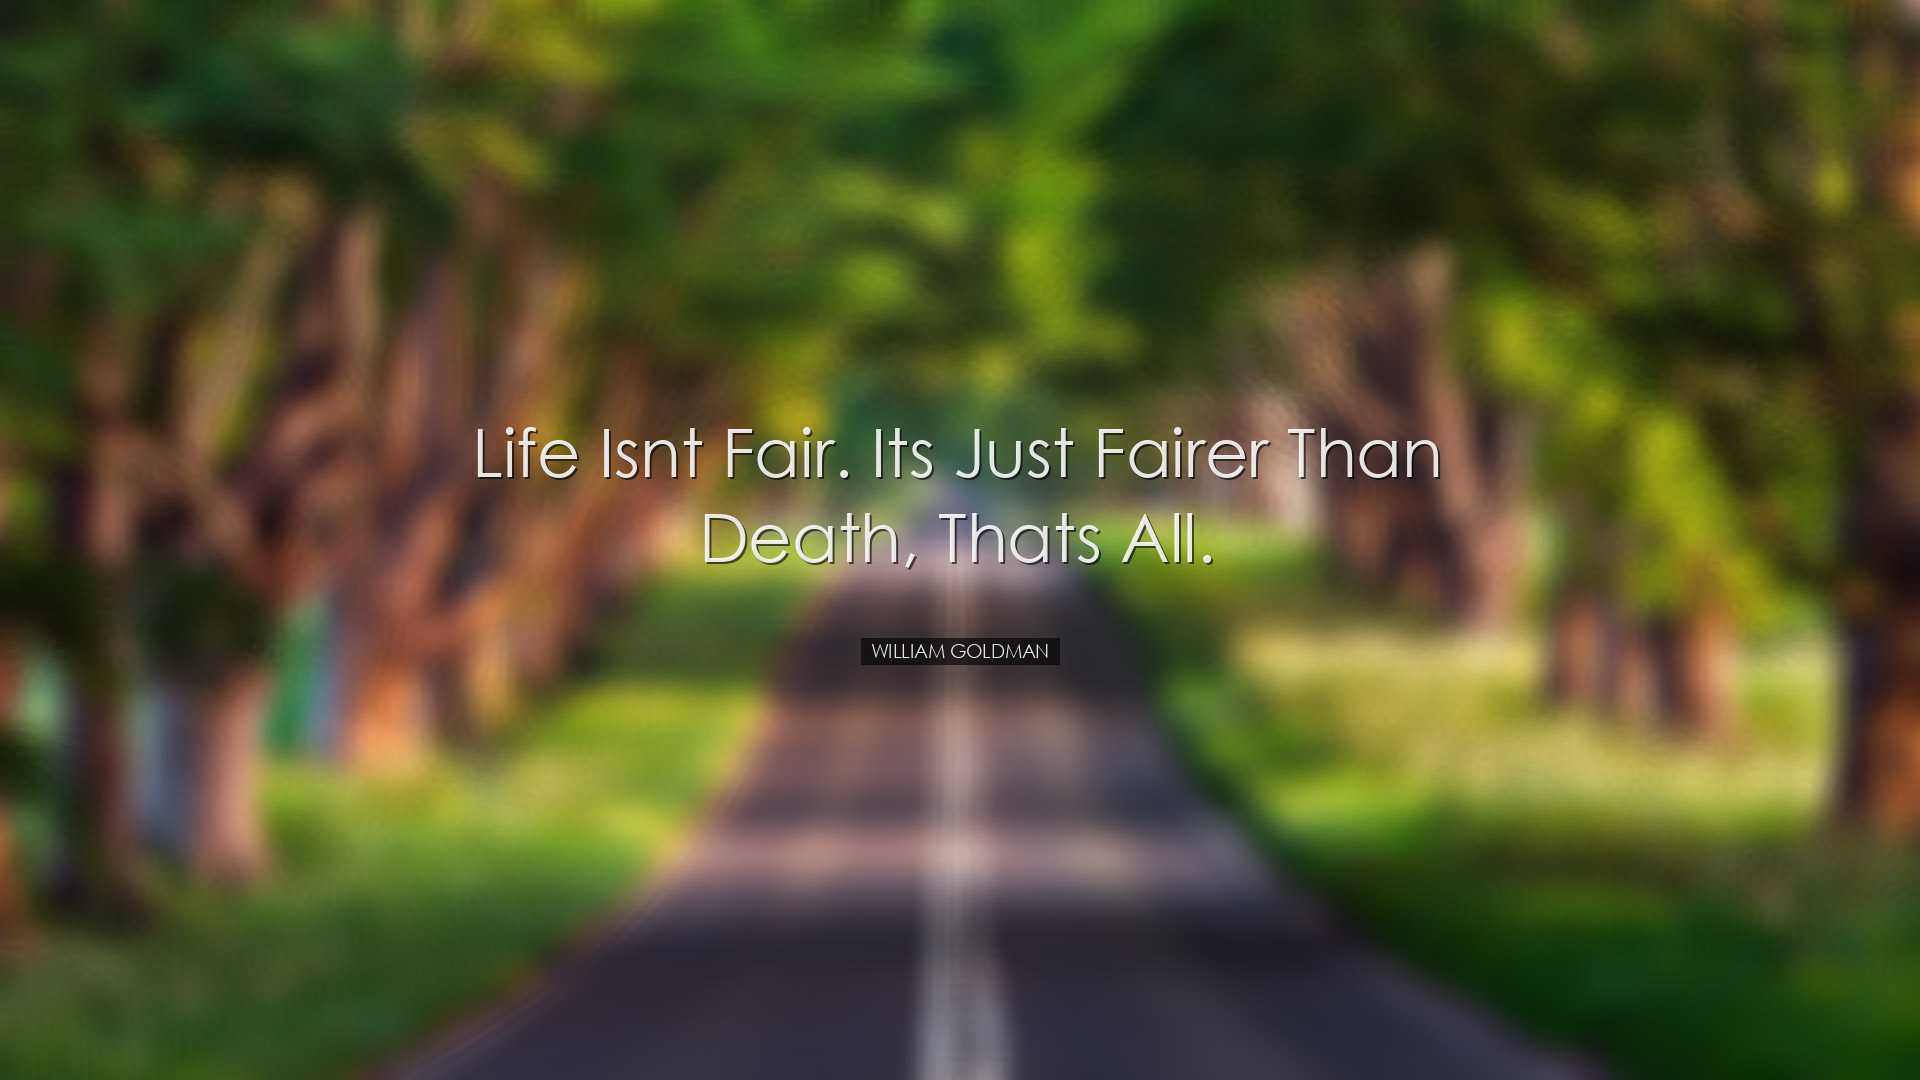 Life isnt fair. Its just fairer than death, thats all. - William G